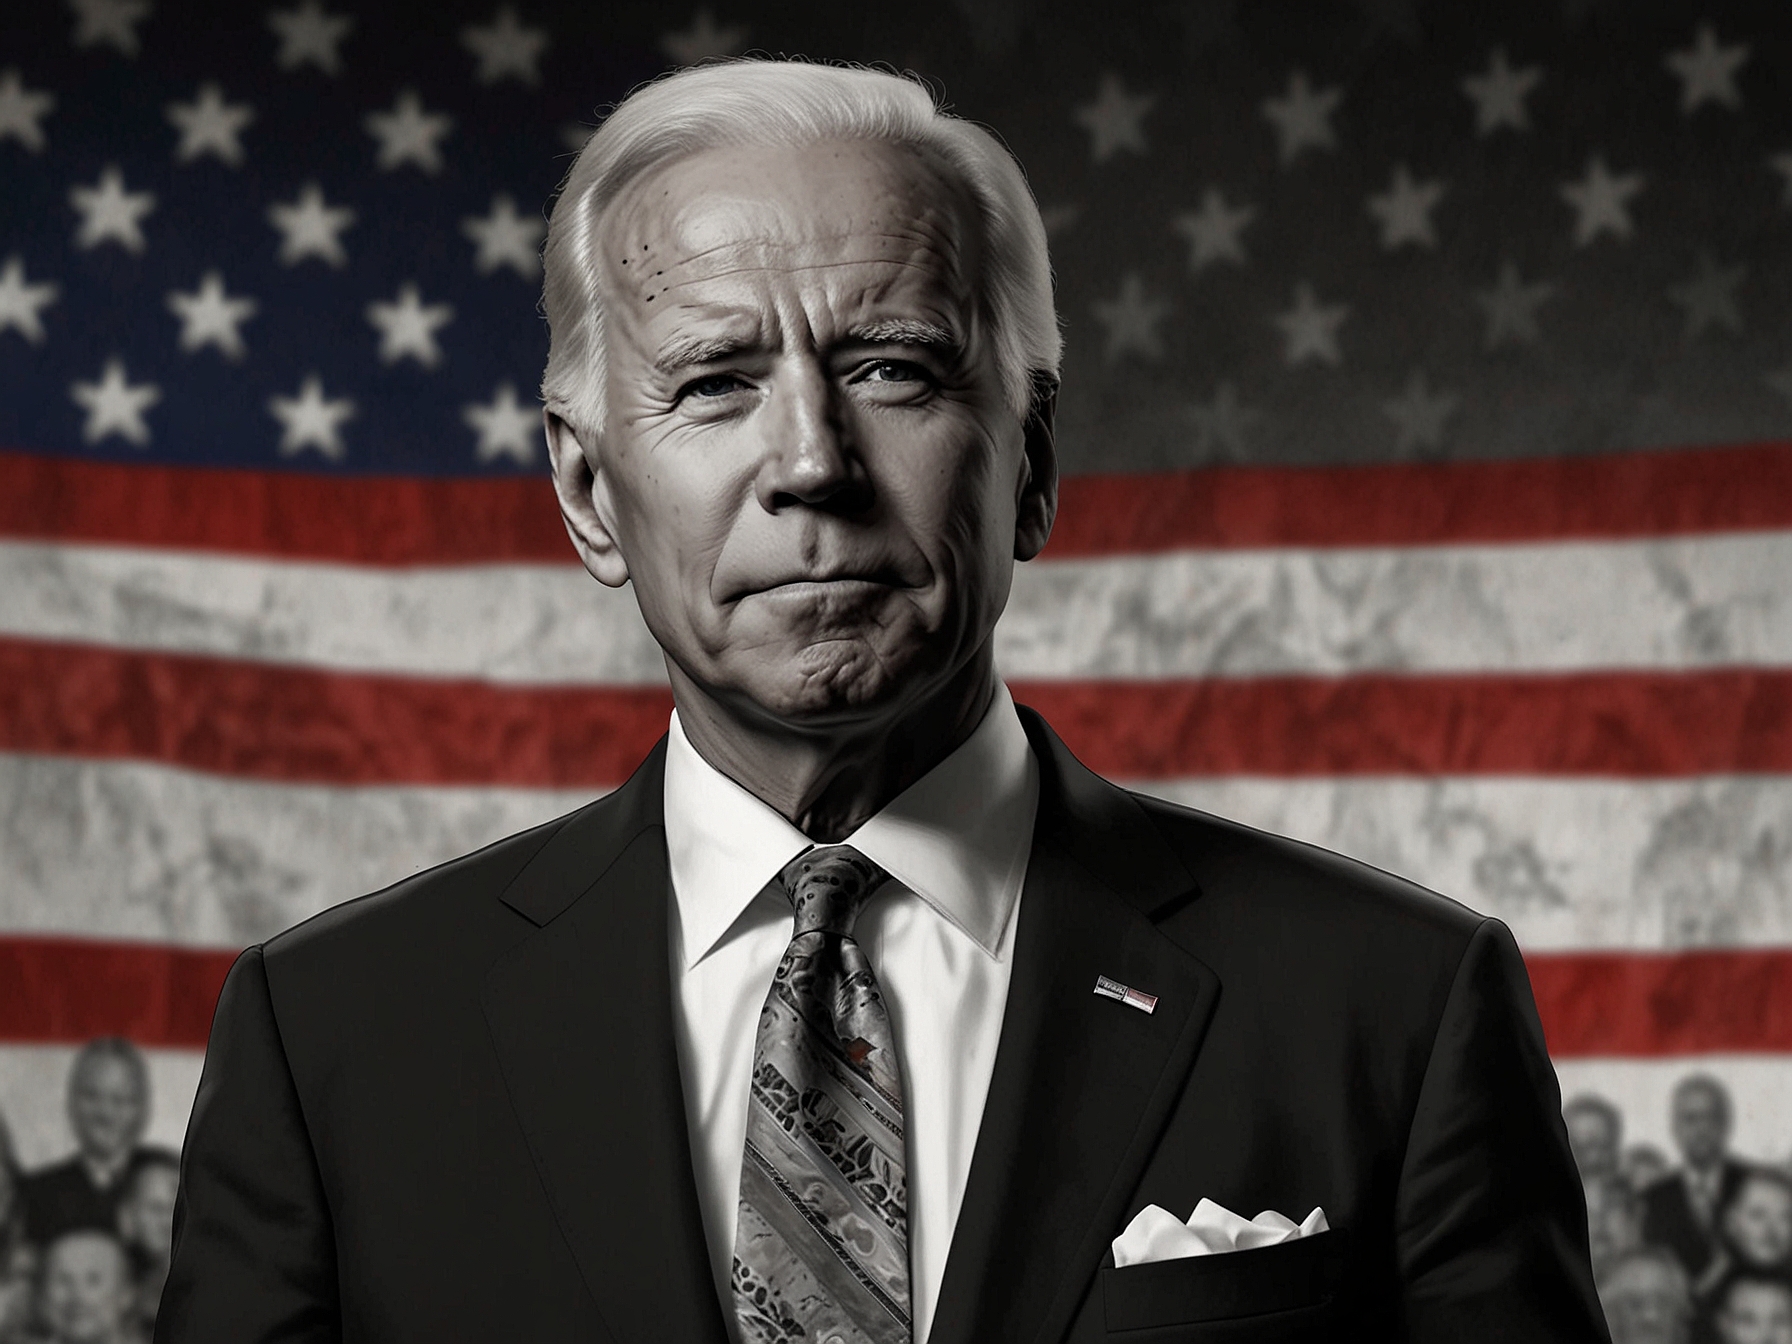 President Joe Biden during a debate, looking confident and composed, representing the campaign's message of stability and experience despite concerns about his age.